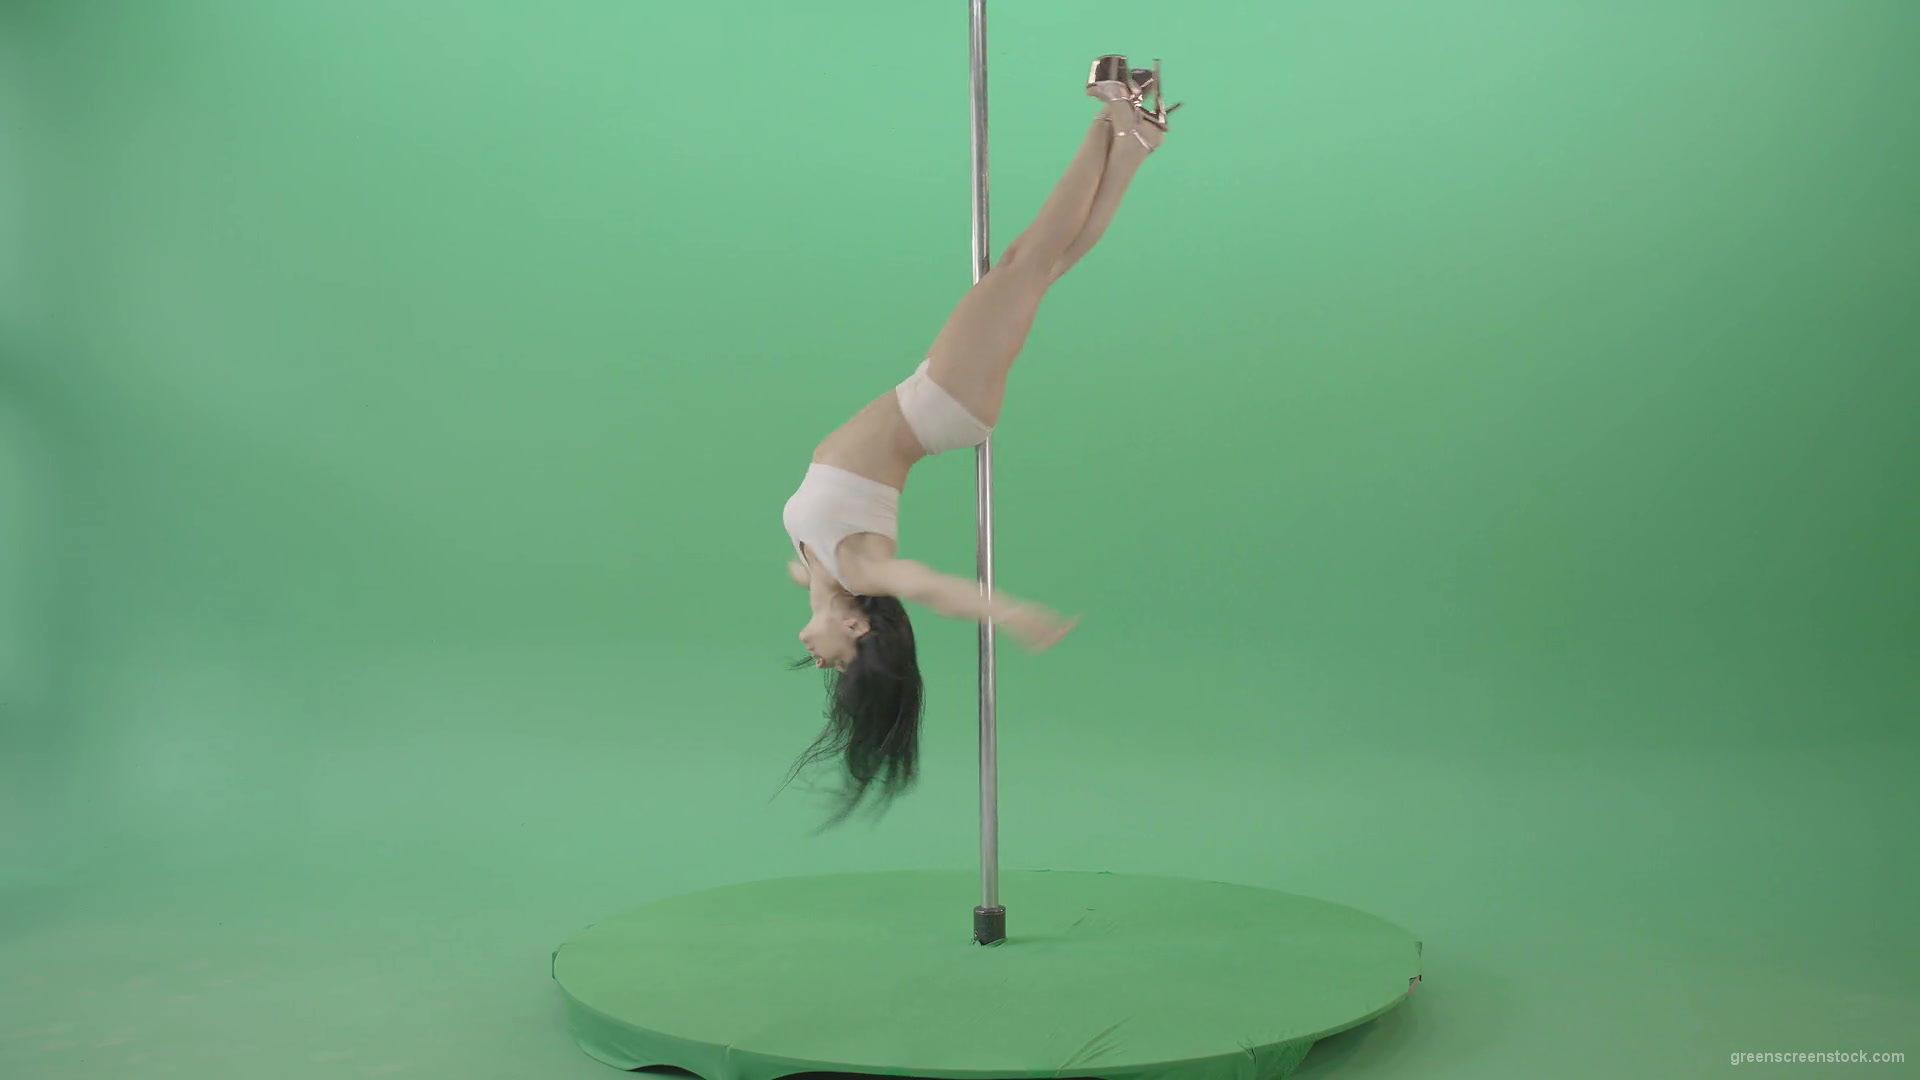 White-dressed-Girl-spinning-down-head-on-pole-dance-on-green-screen-4K-Video-Footage-1920_004 Green Screen Stock